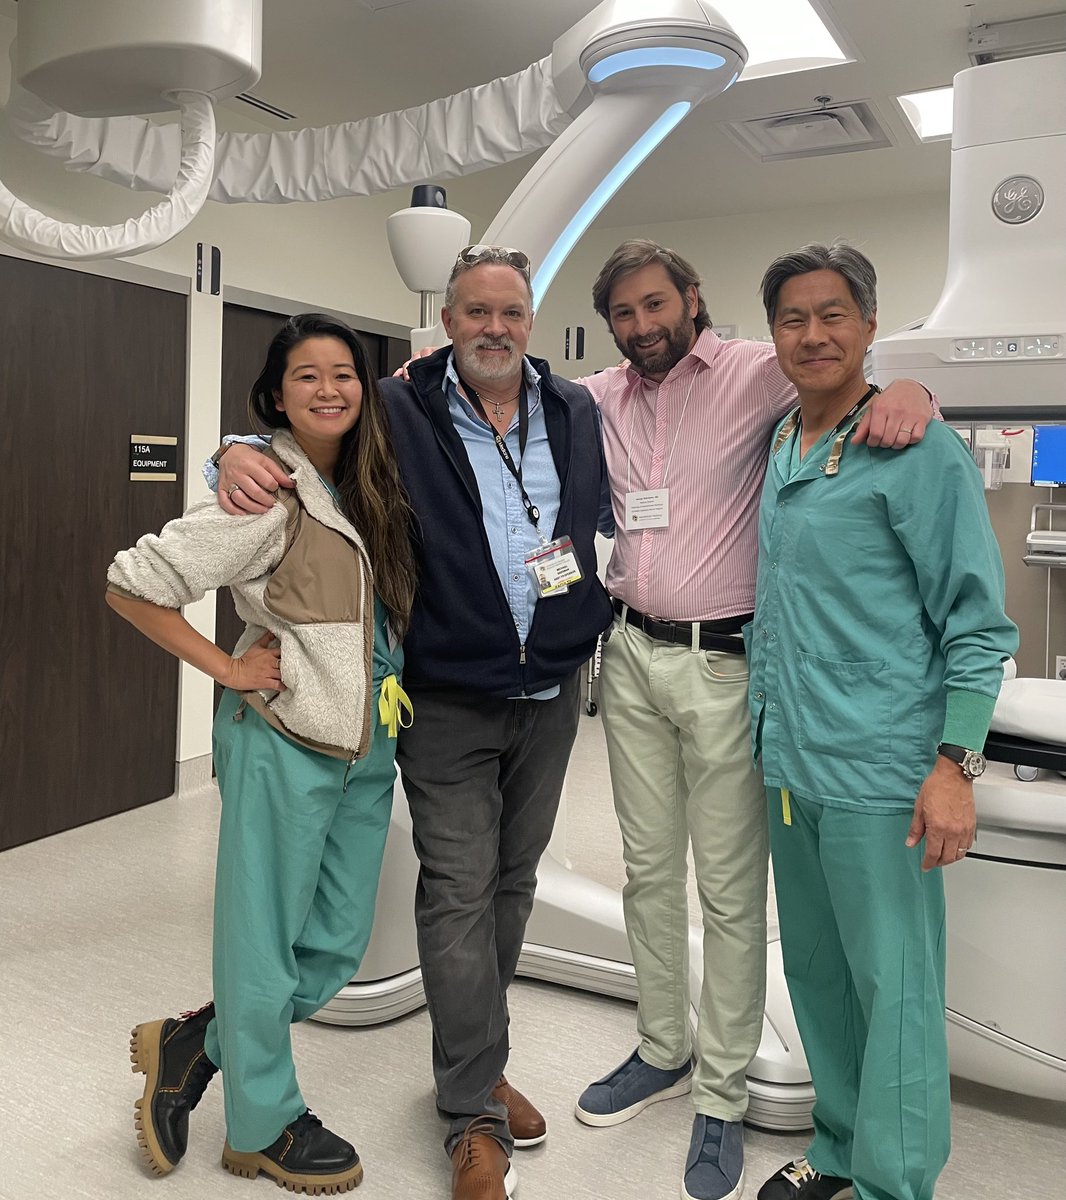 Our new @IrColorado OBL is open! Down the street from @uchealth Highlands Ranch Hospital, the facility is ideally situated to care for patients in the Denver metro area. Congrats to @GZlotchenko and Mike Sassman on the launch! Much success! #IRad @LWalkerMD